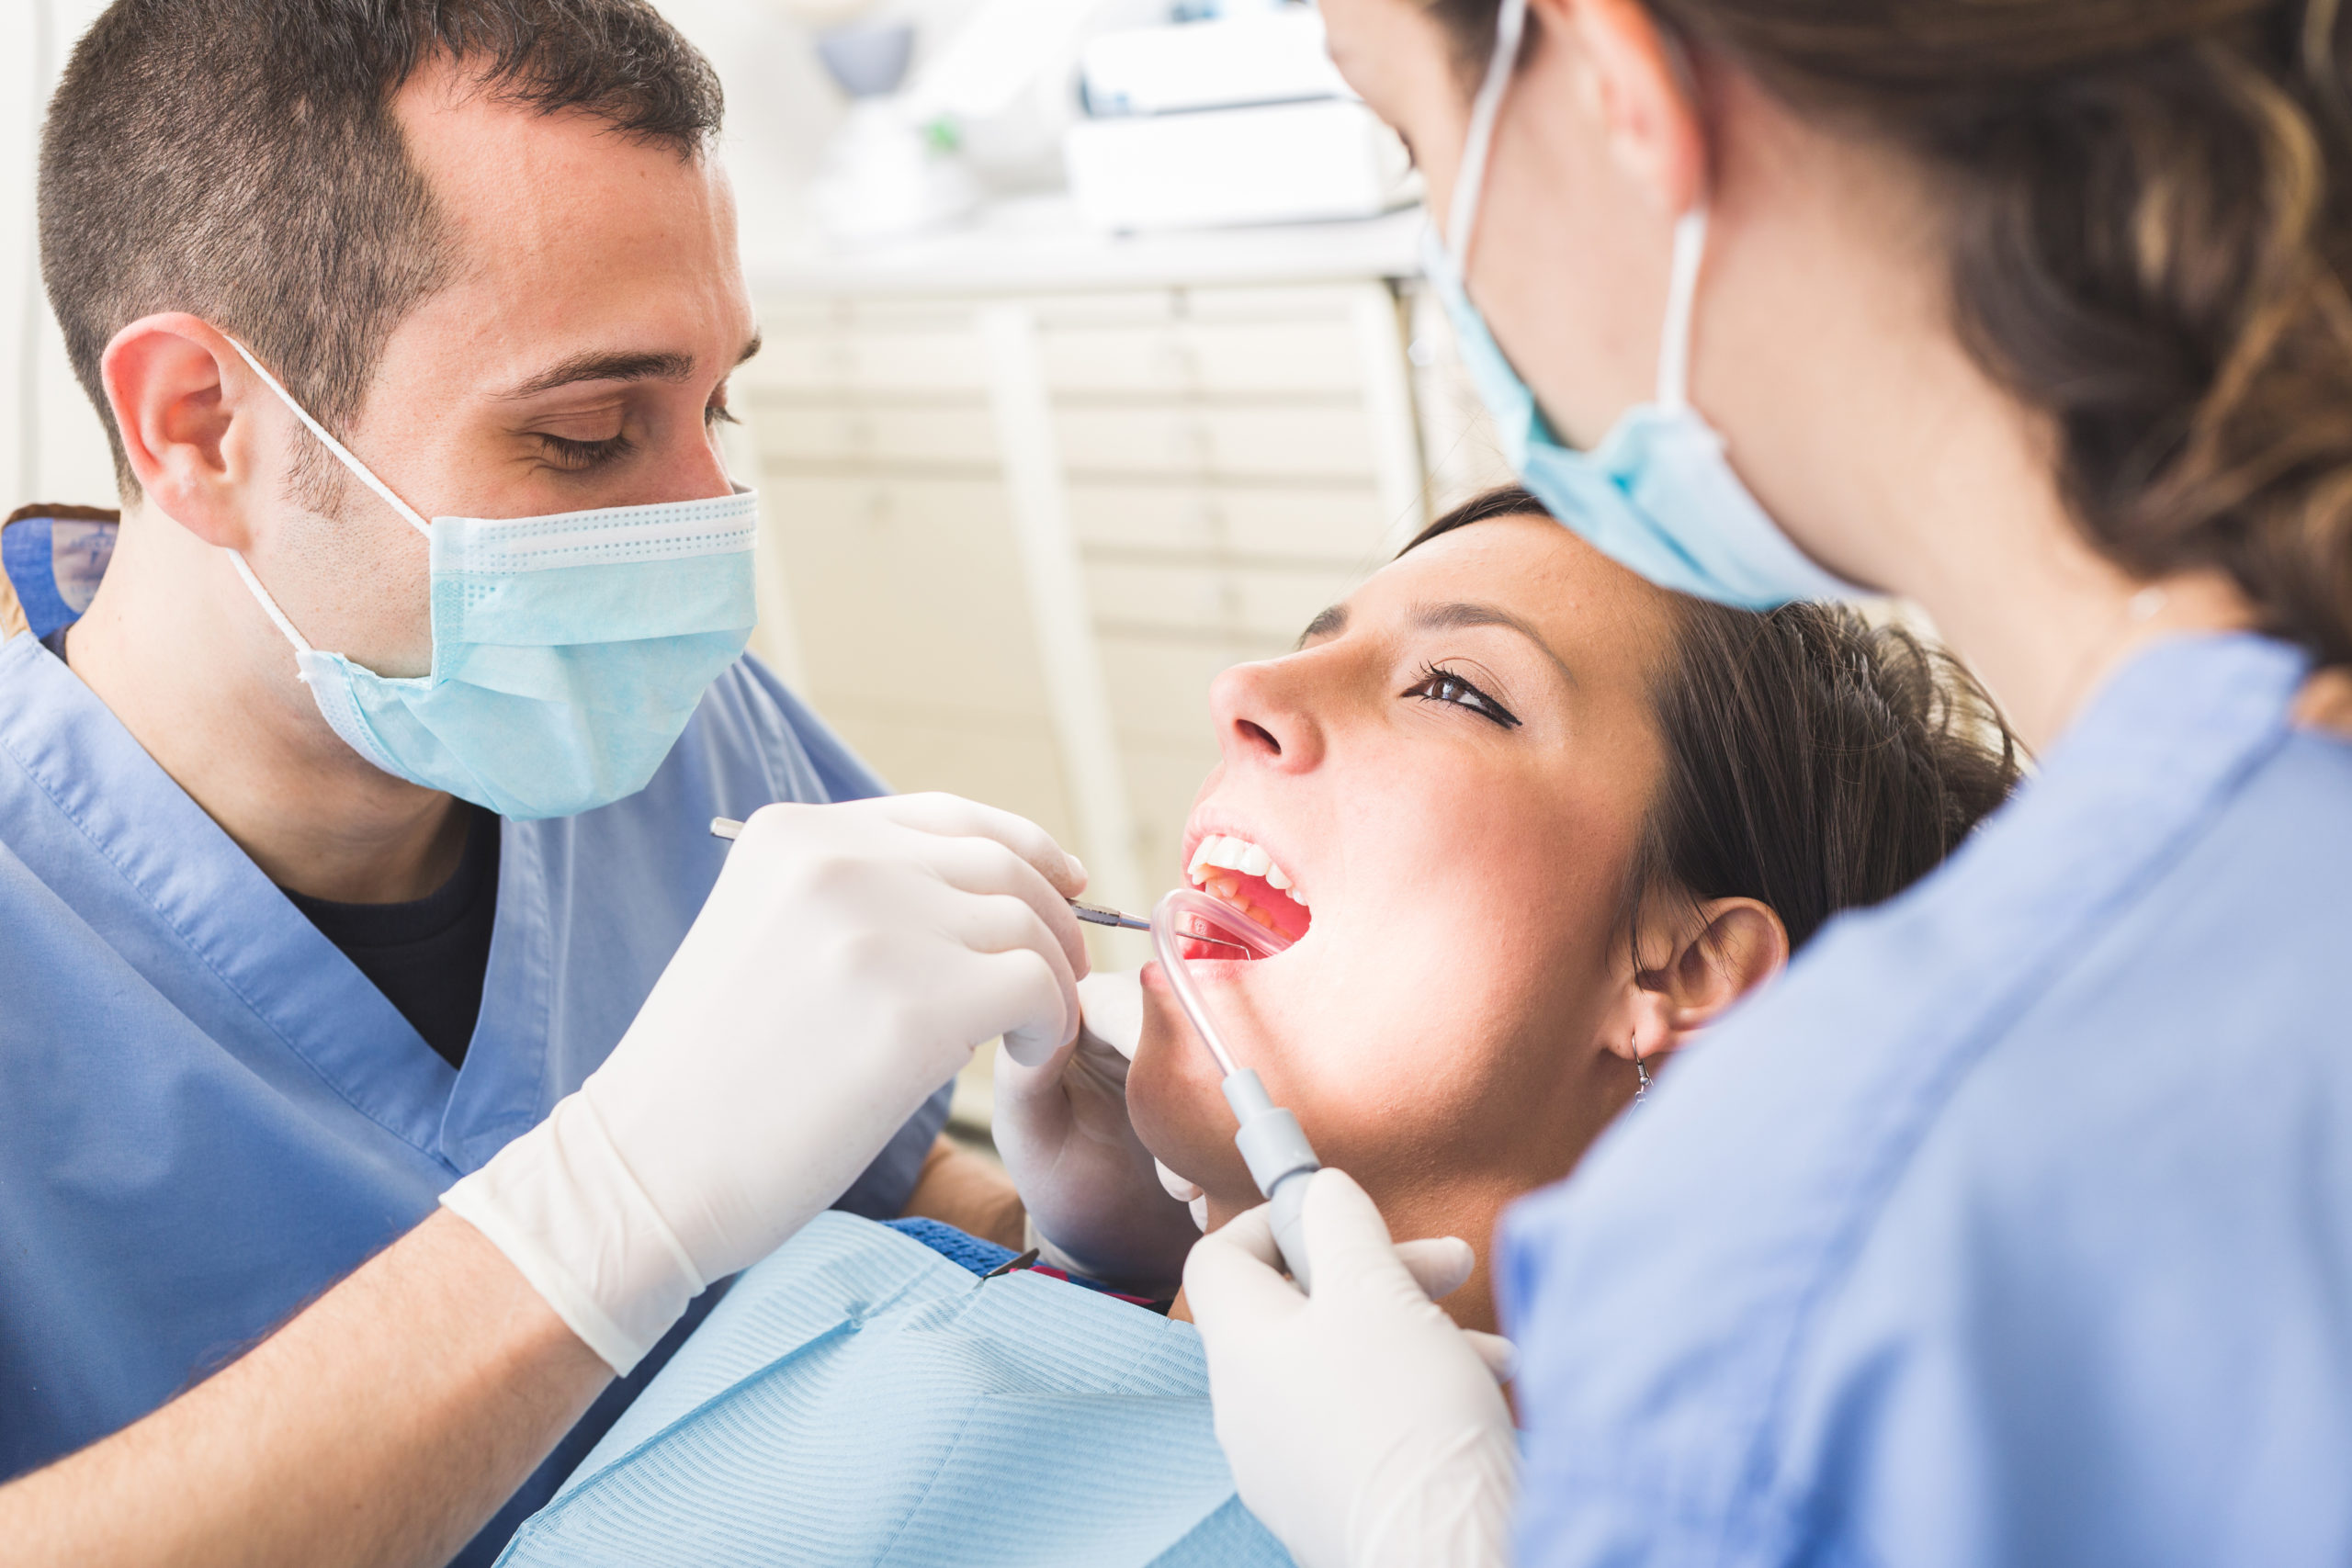 3 Big Differences Between Dental Hygienists And Dentists